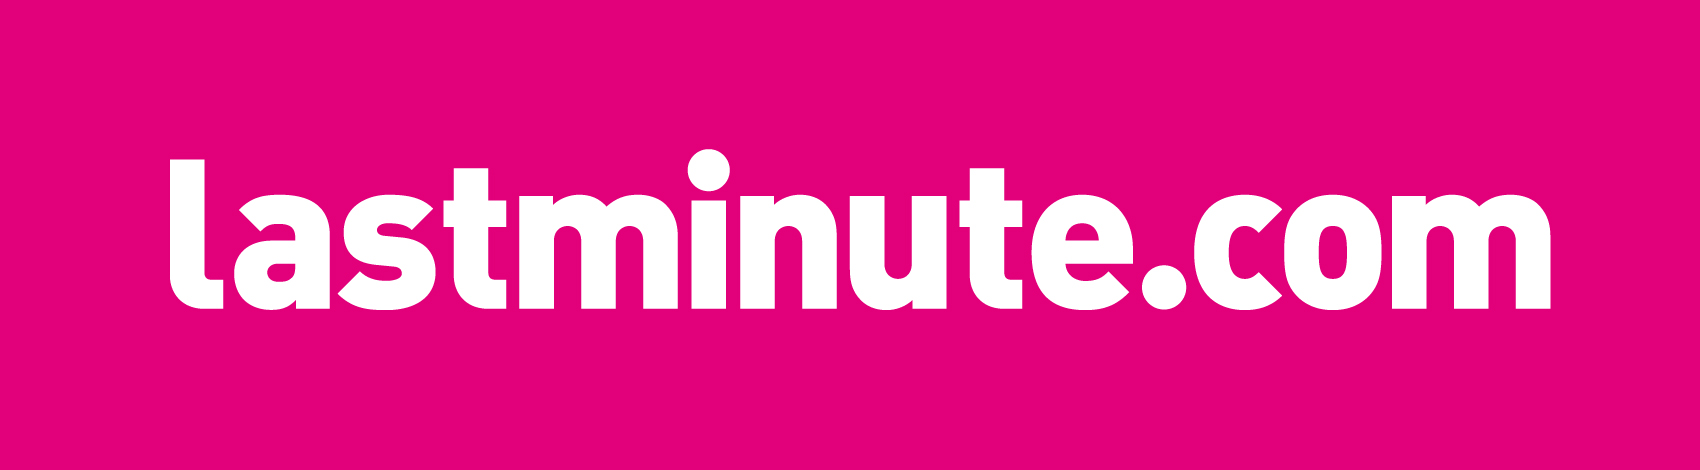 https://lmgroup.lastminute.com/